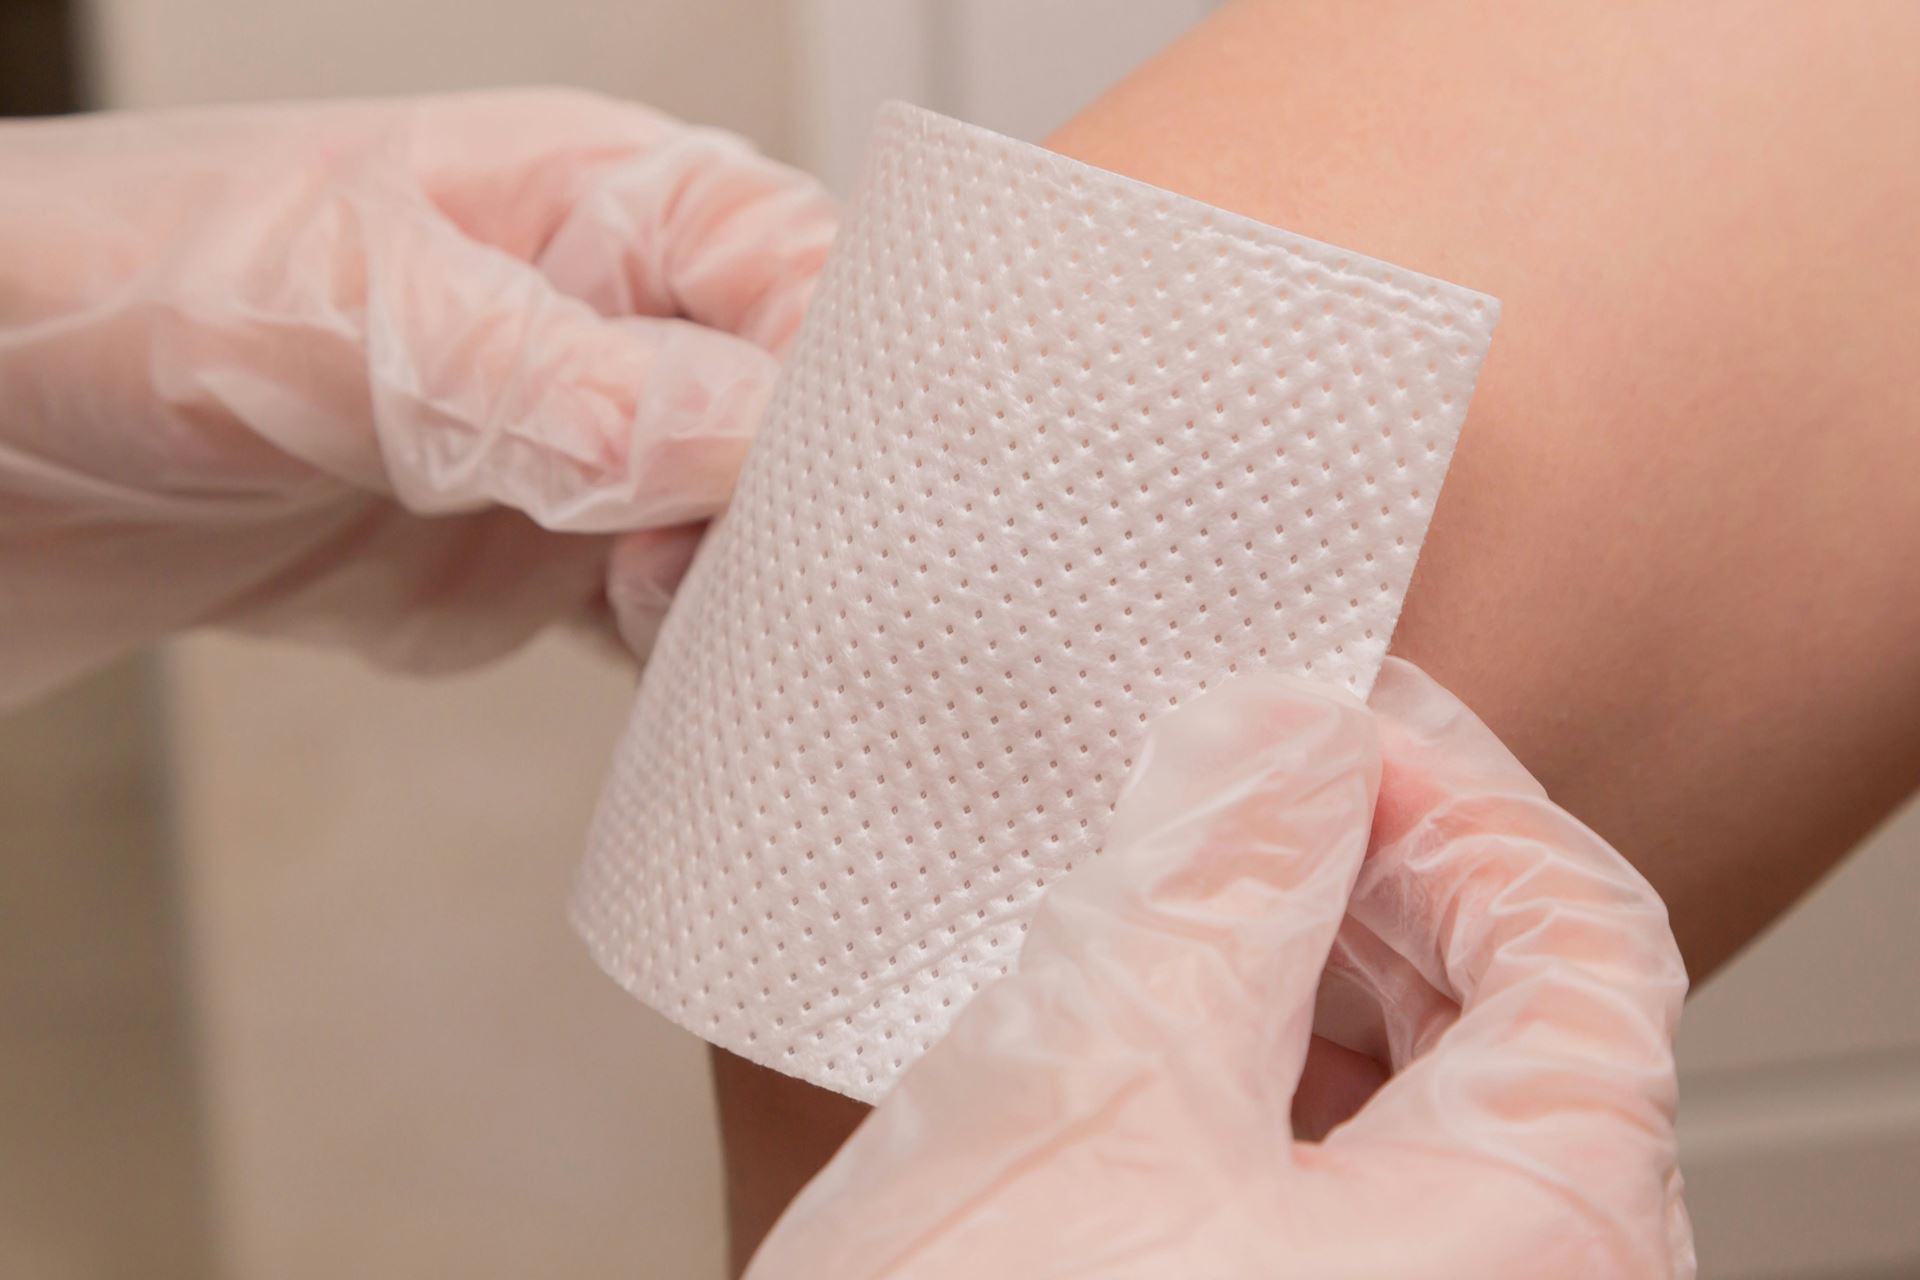 An image of a bandage being applied